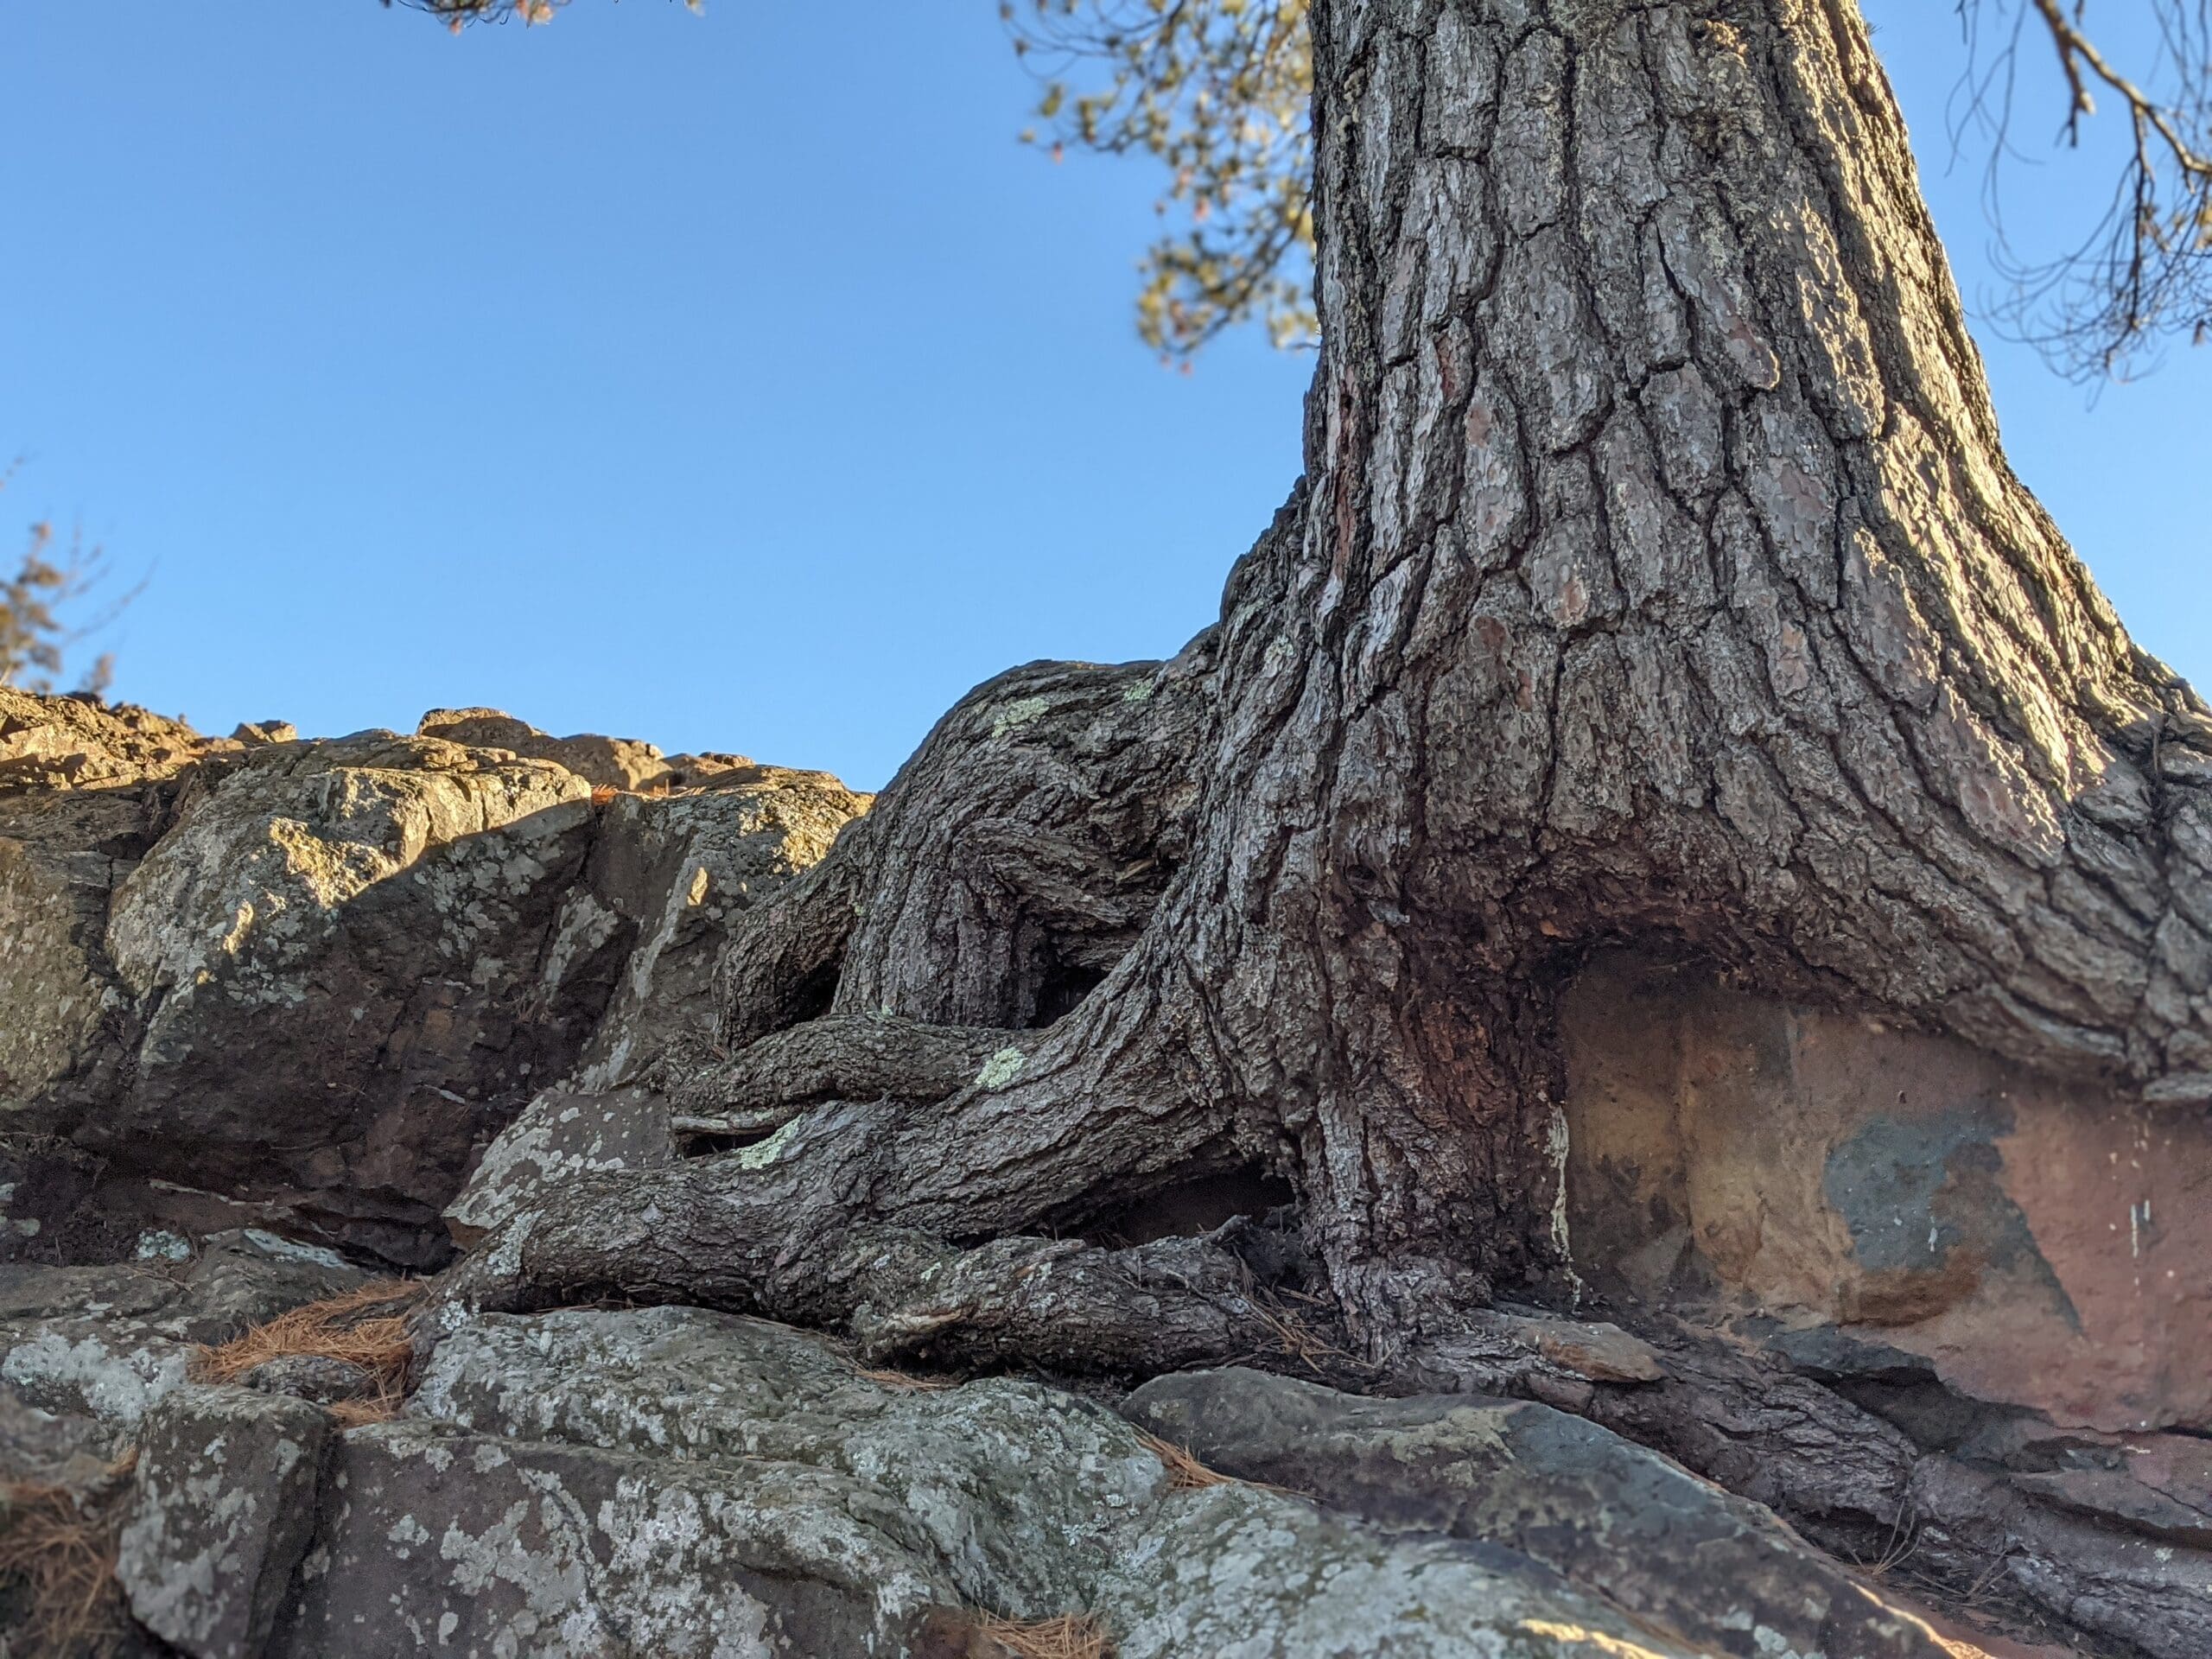 base of tree growing on rock ledge with roots gripping rocks